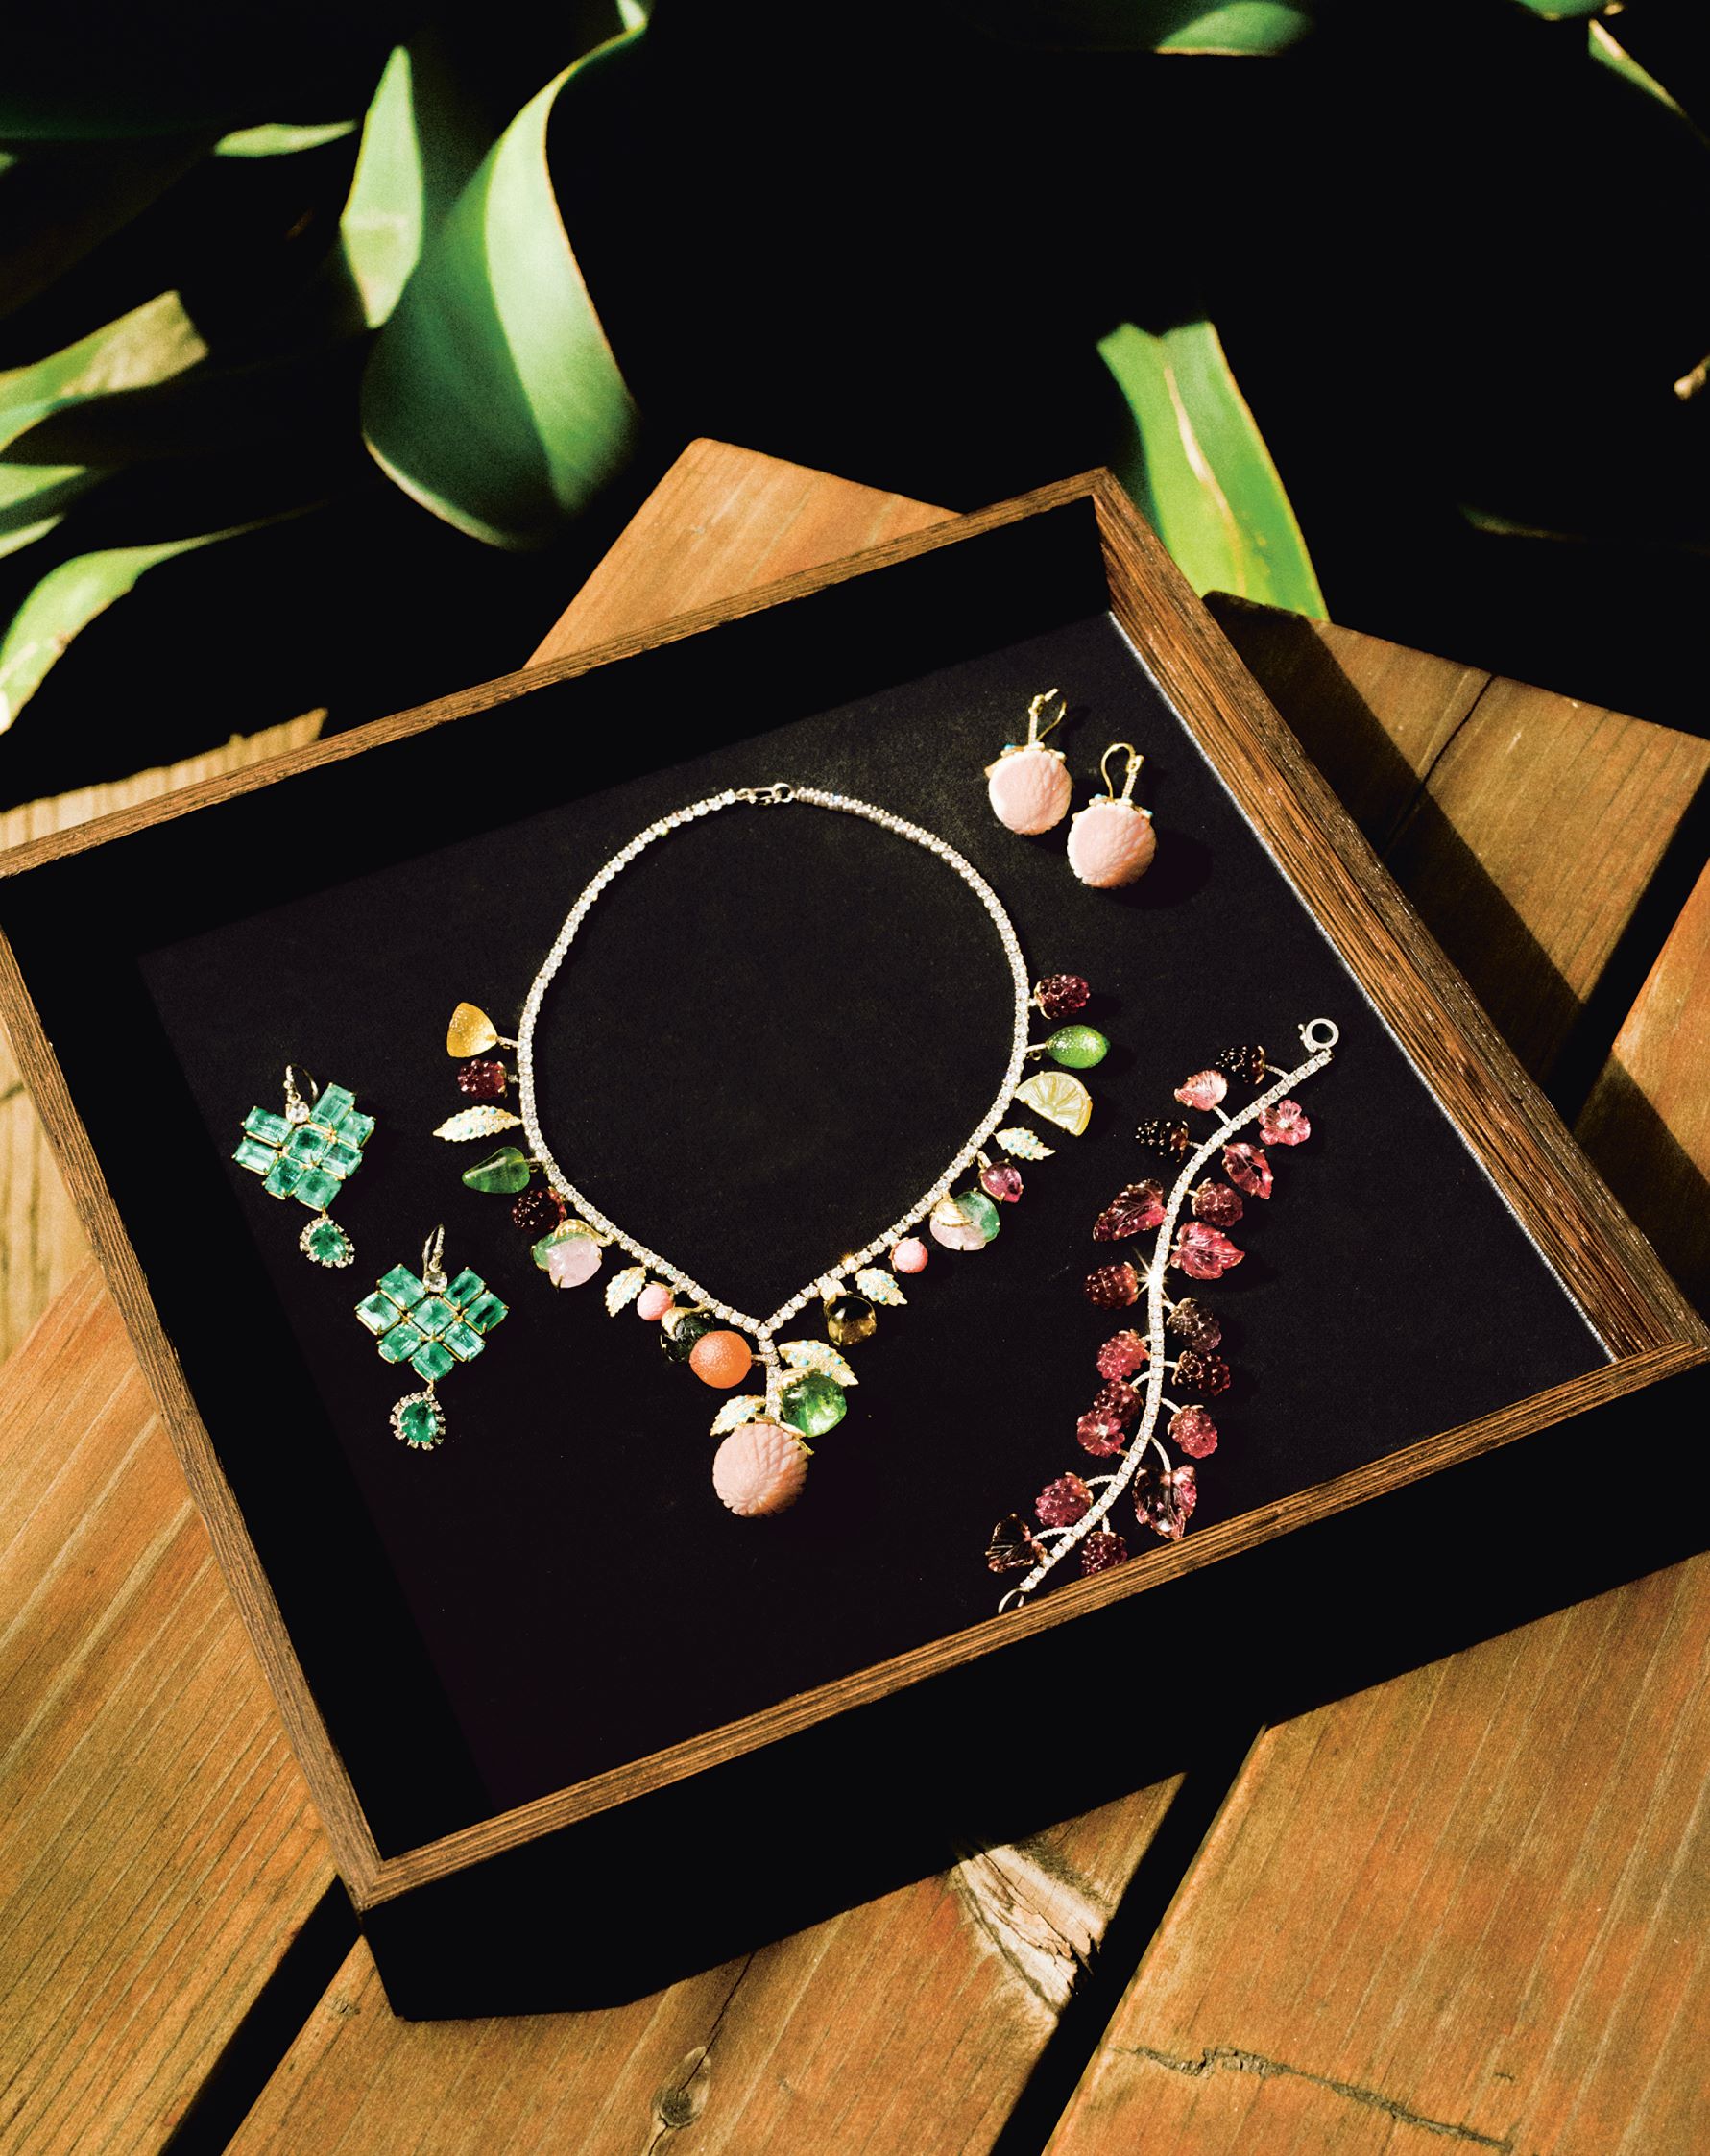 Irene Neuwirth's Green Emerald Diamond Gold Double Drop Earrings with One of a Kind Fruit Punch Diamond Necklace, Carved Opal Strawberry Earrings, and One of a Kind Pink Tourmaline and Diamond Raspberry bracelet. Photo by Chantal Anderson